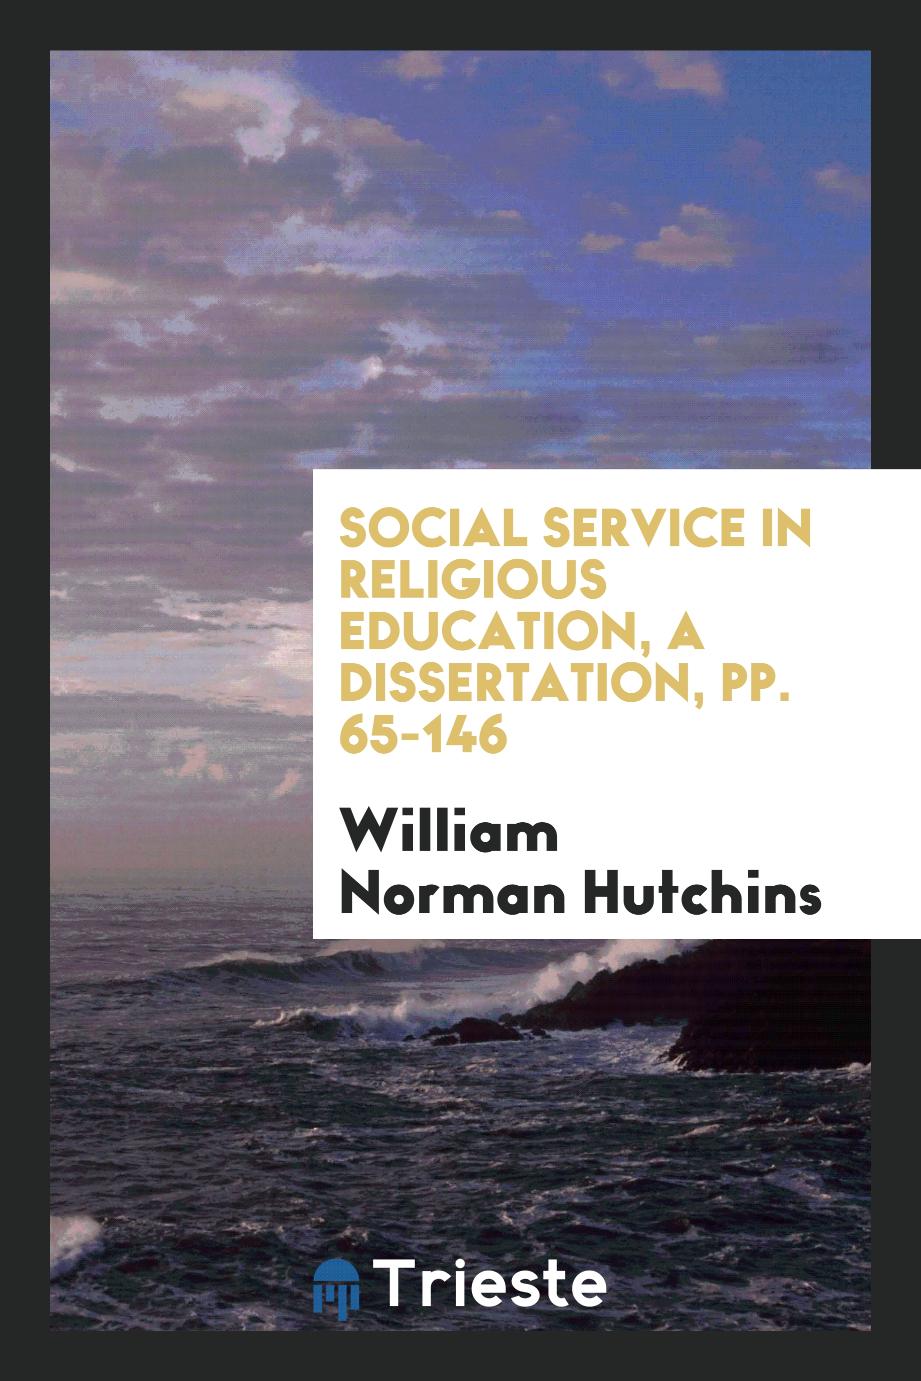 Social Service in Religious Education, a Dissertation, pp. 65-146